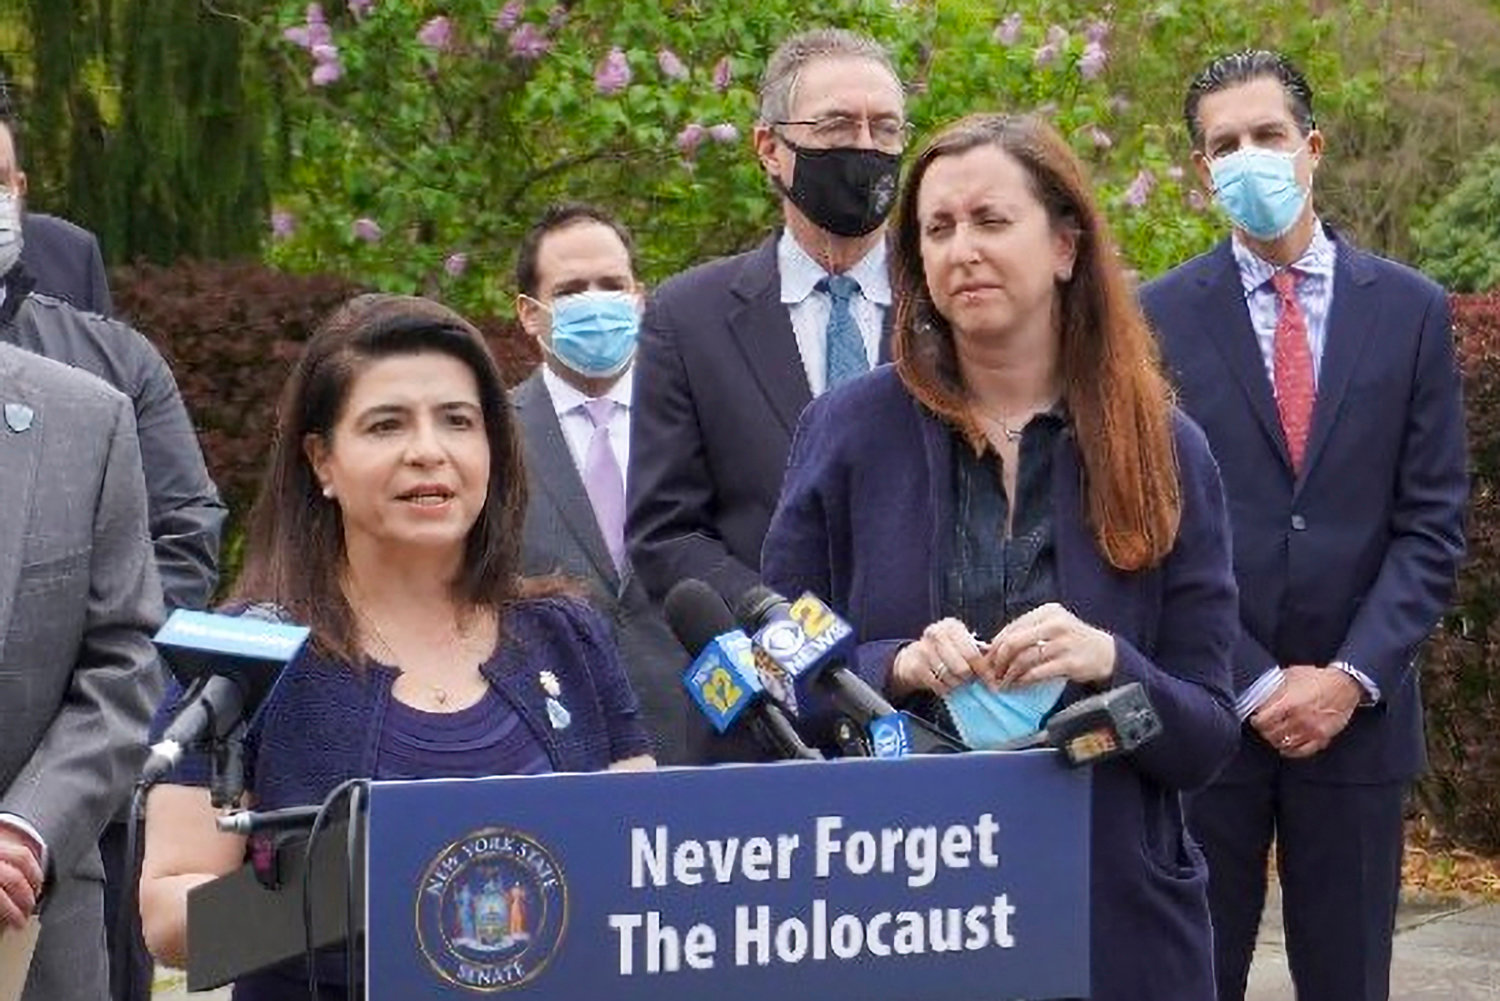 A group of state legislators argue the recent rise in hate crimes against the Jewish community is because New York’s public schools don’t effectively teach about the Holocaust — a state-sponsored genocide that killed 6 million people during World War II. They include Assemblyman Jeffrey Dinowitz, who co-sponsors a bill that aims to ensure the Holocaust is being taught properly in schools across the state.